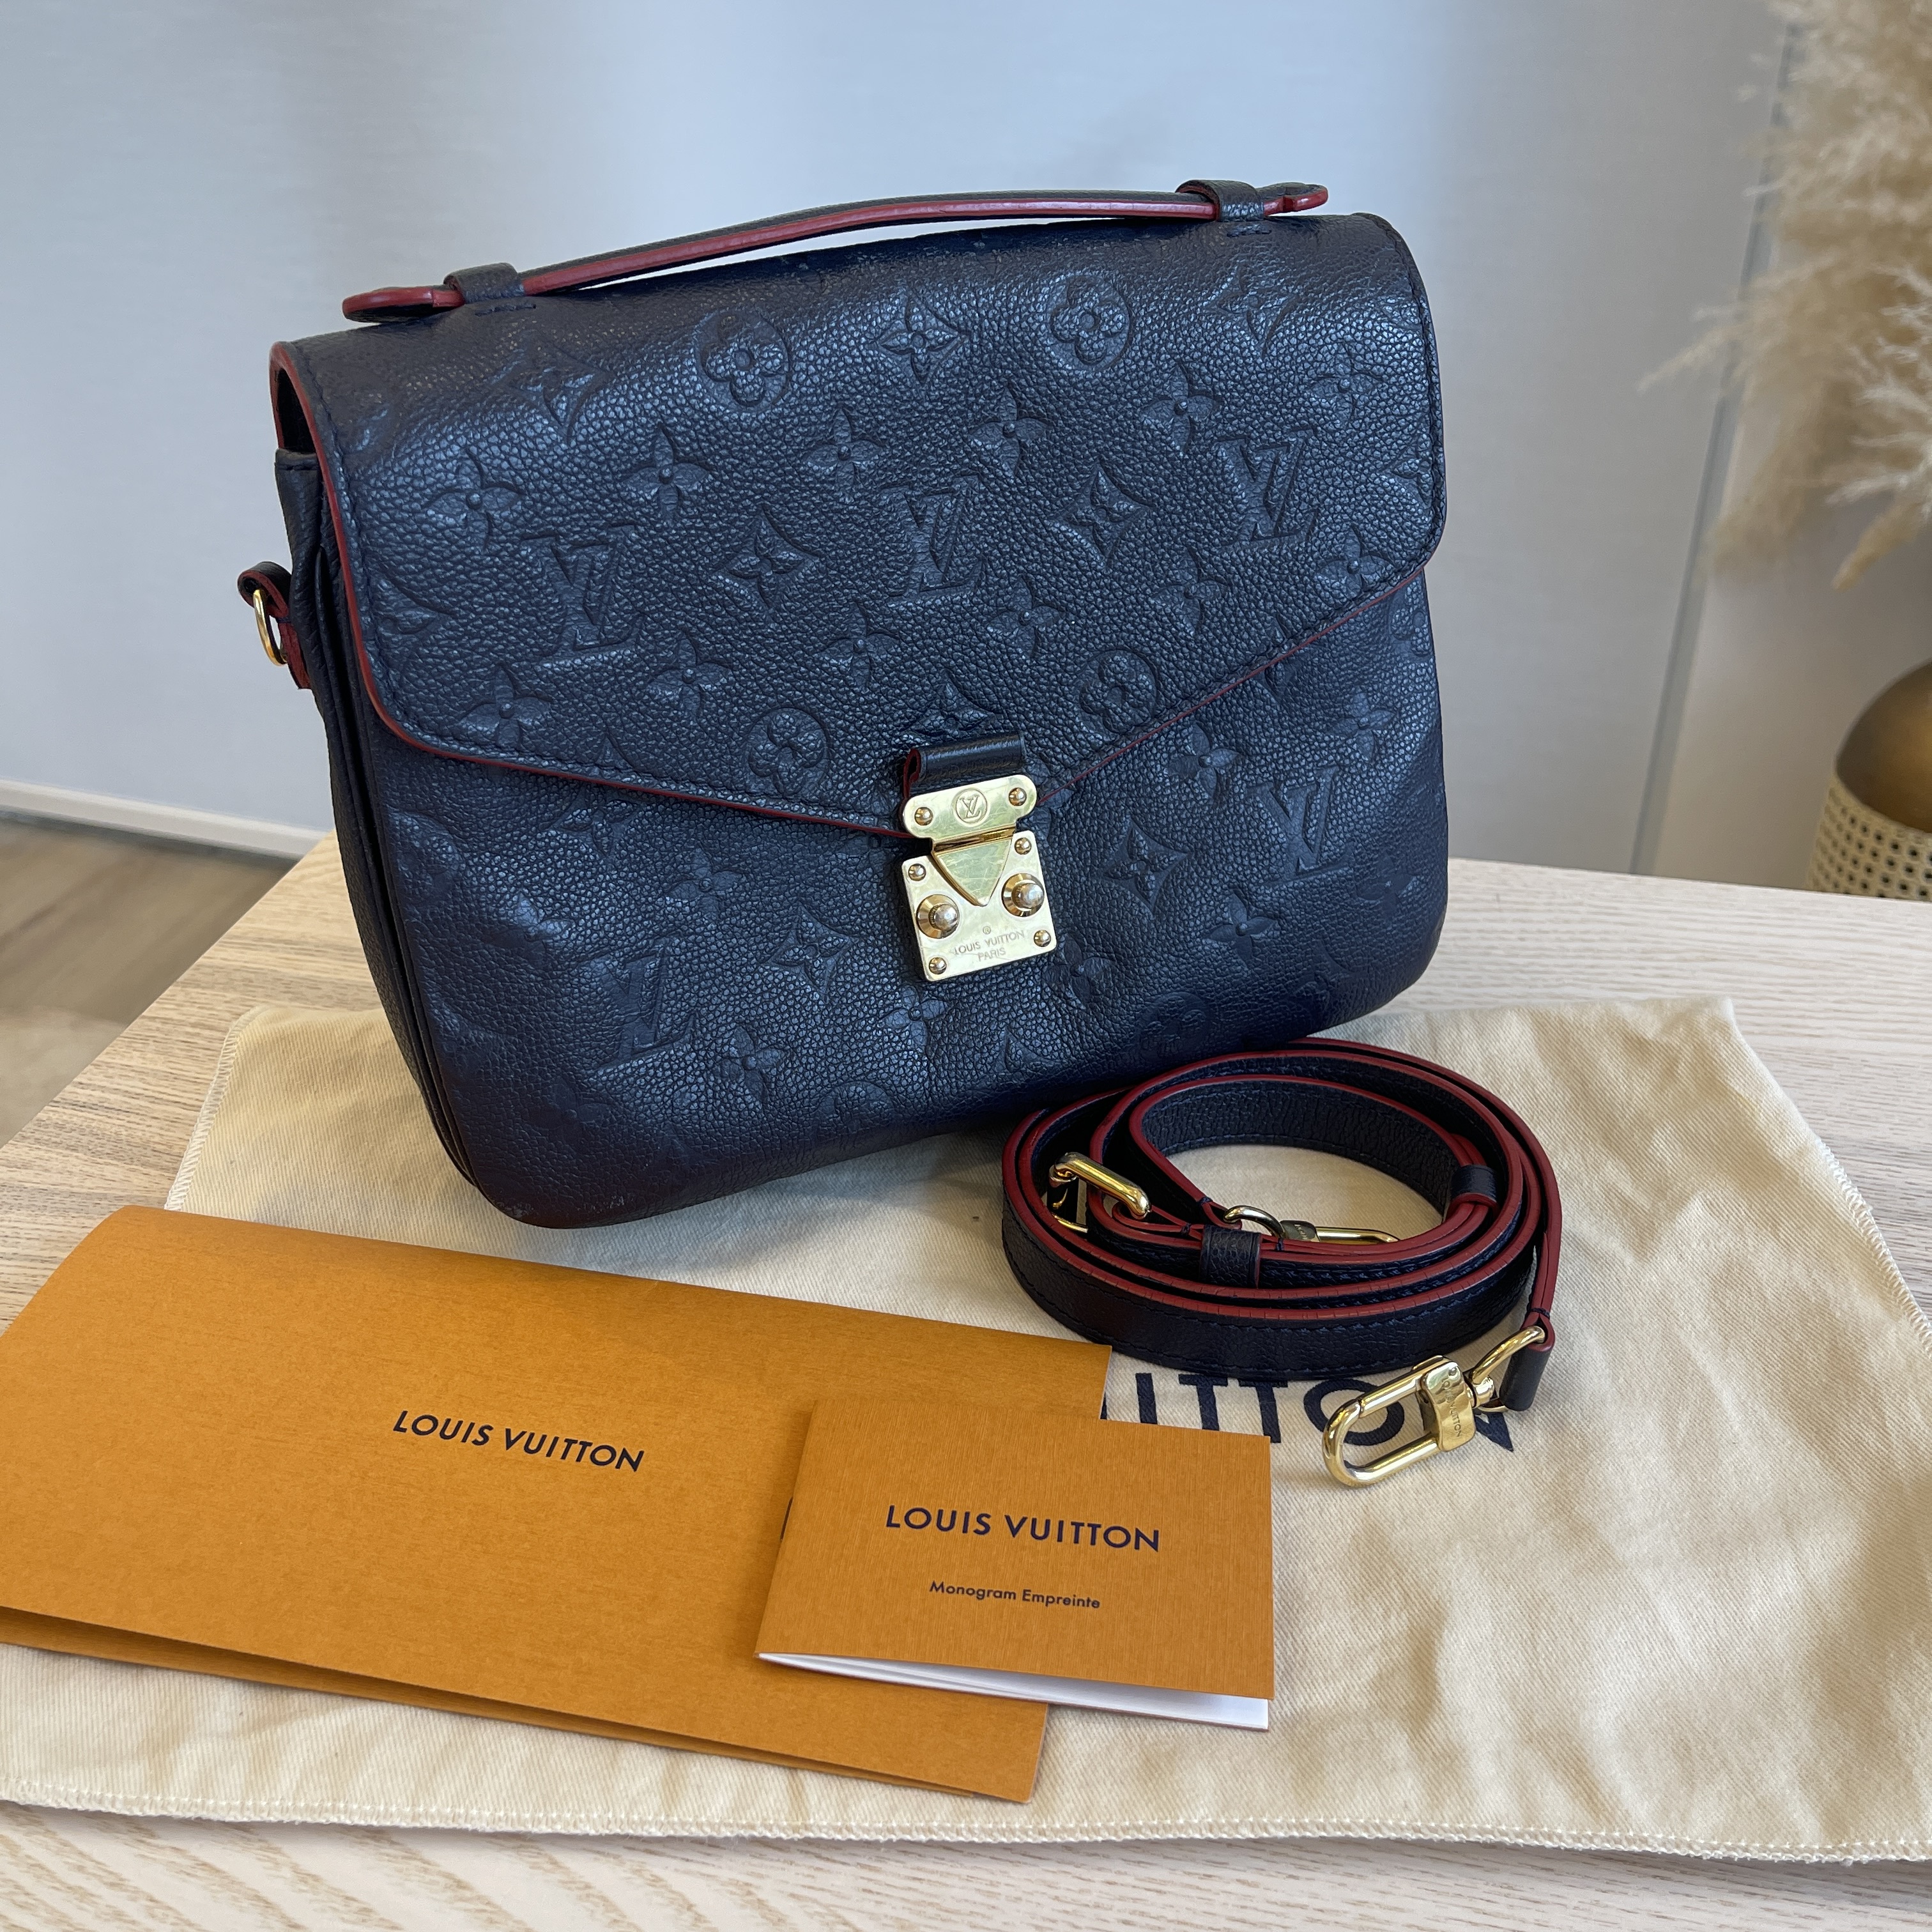 Pochette Metis in monogram with back leather zipper pull. I have